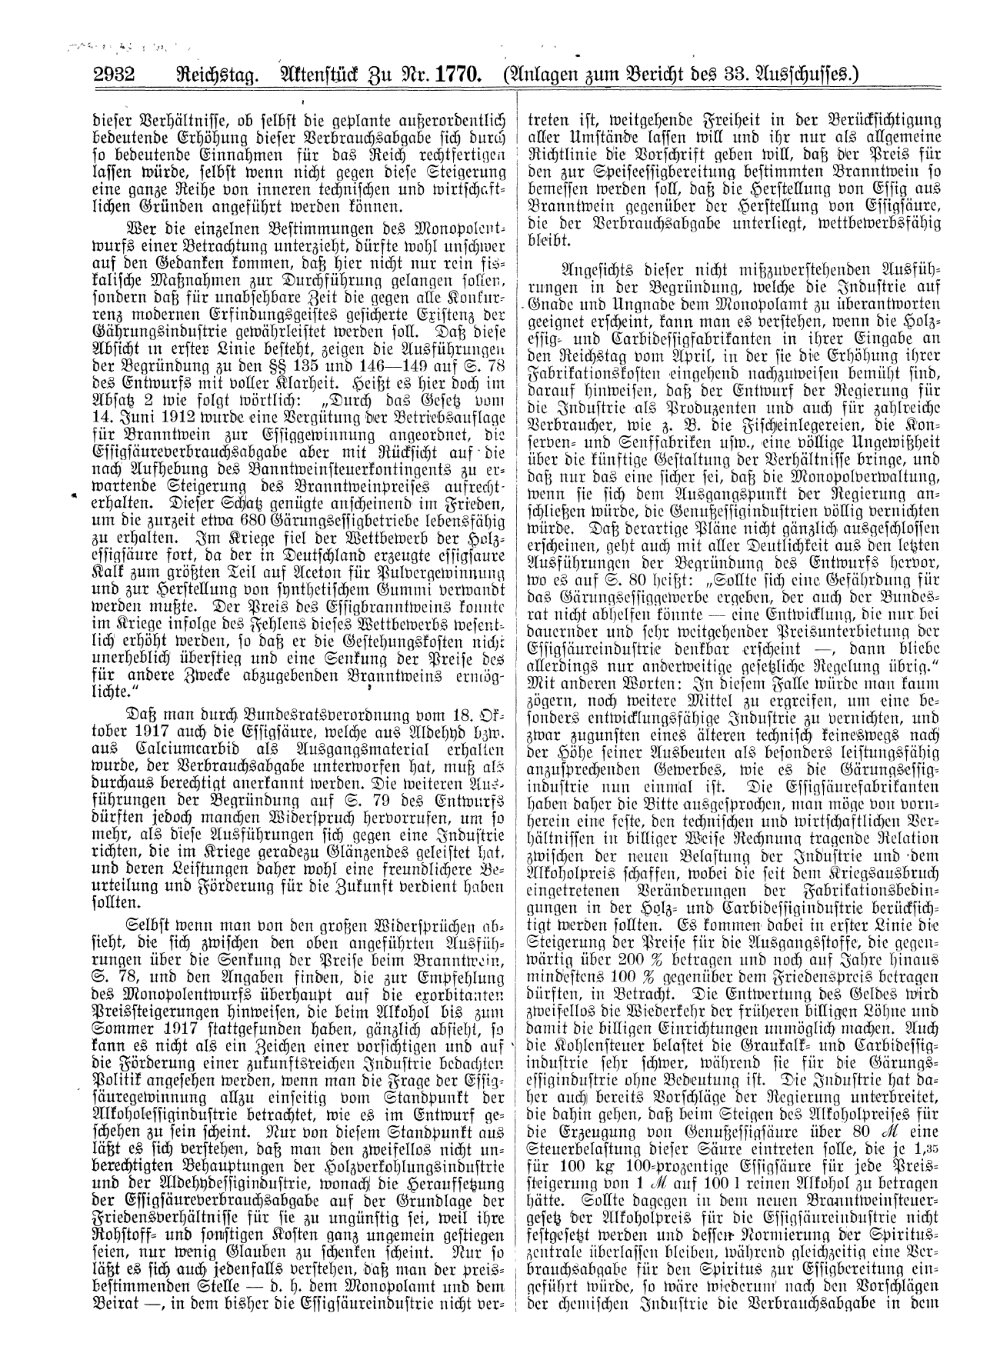 Scan of page 2932